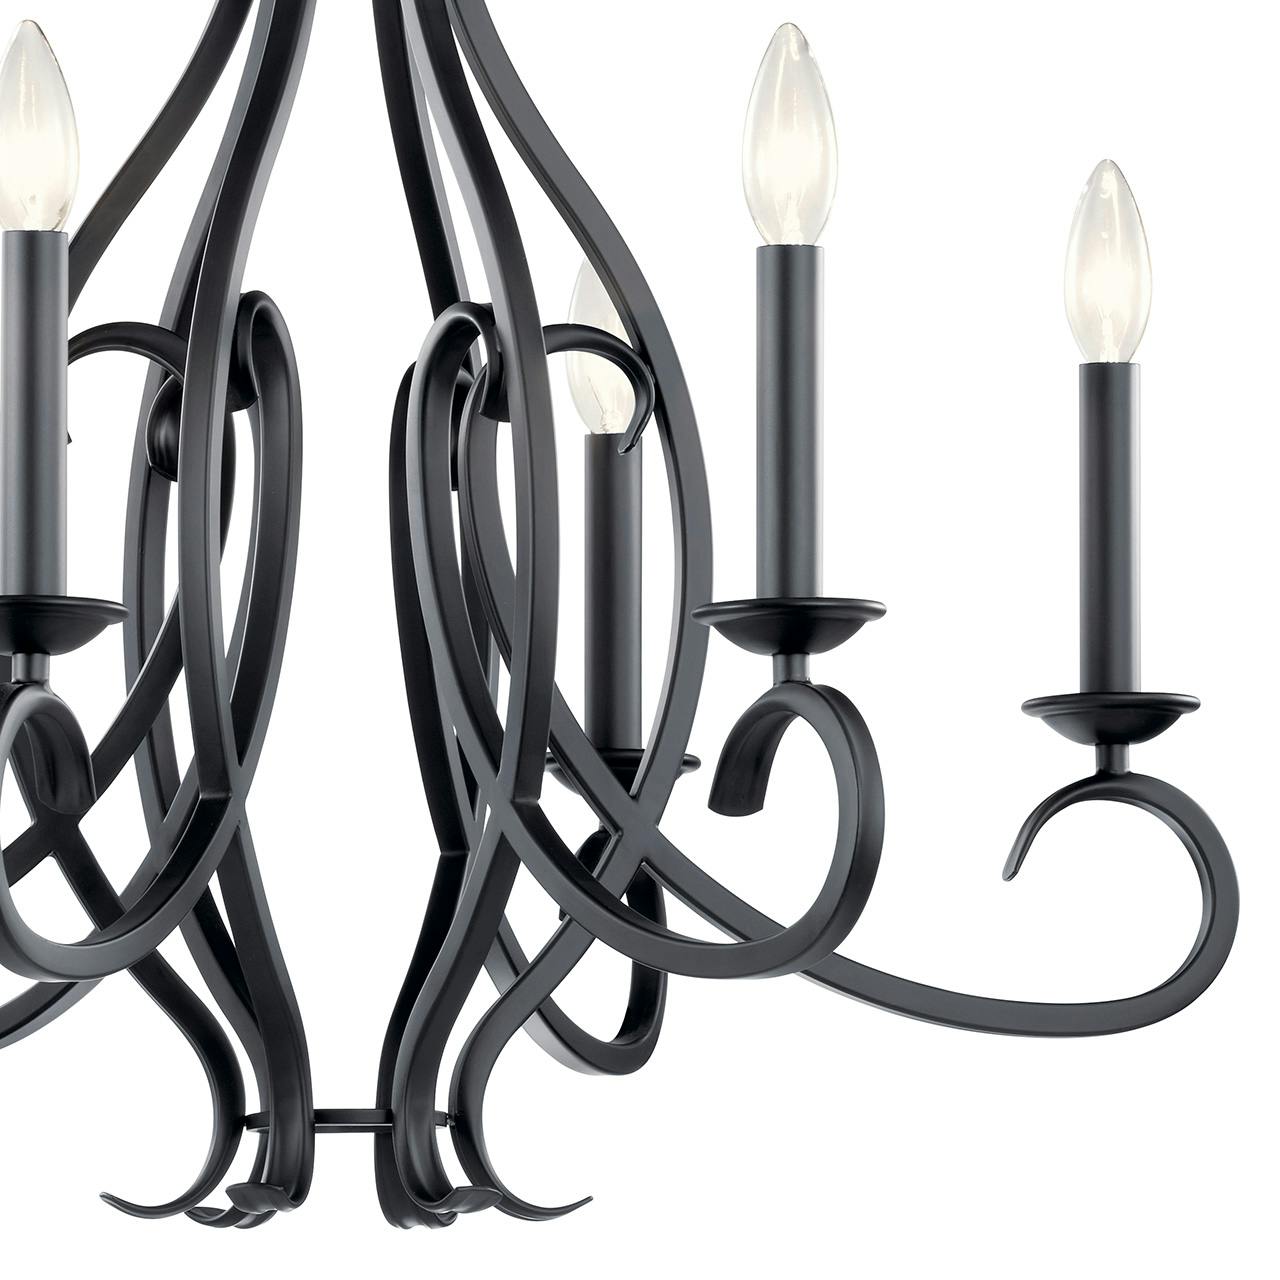 Close up view of the Ania 6 Light Chandelier in Black on a white background